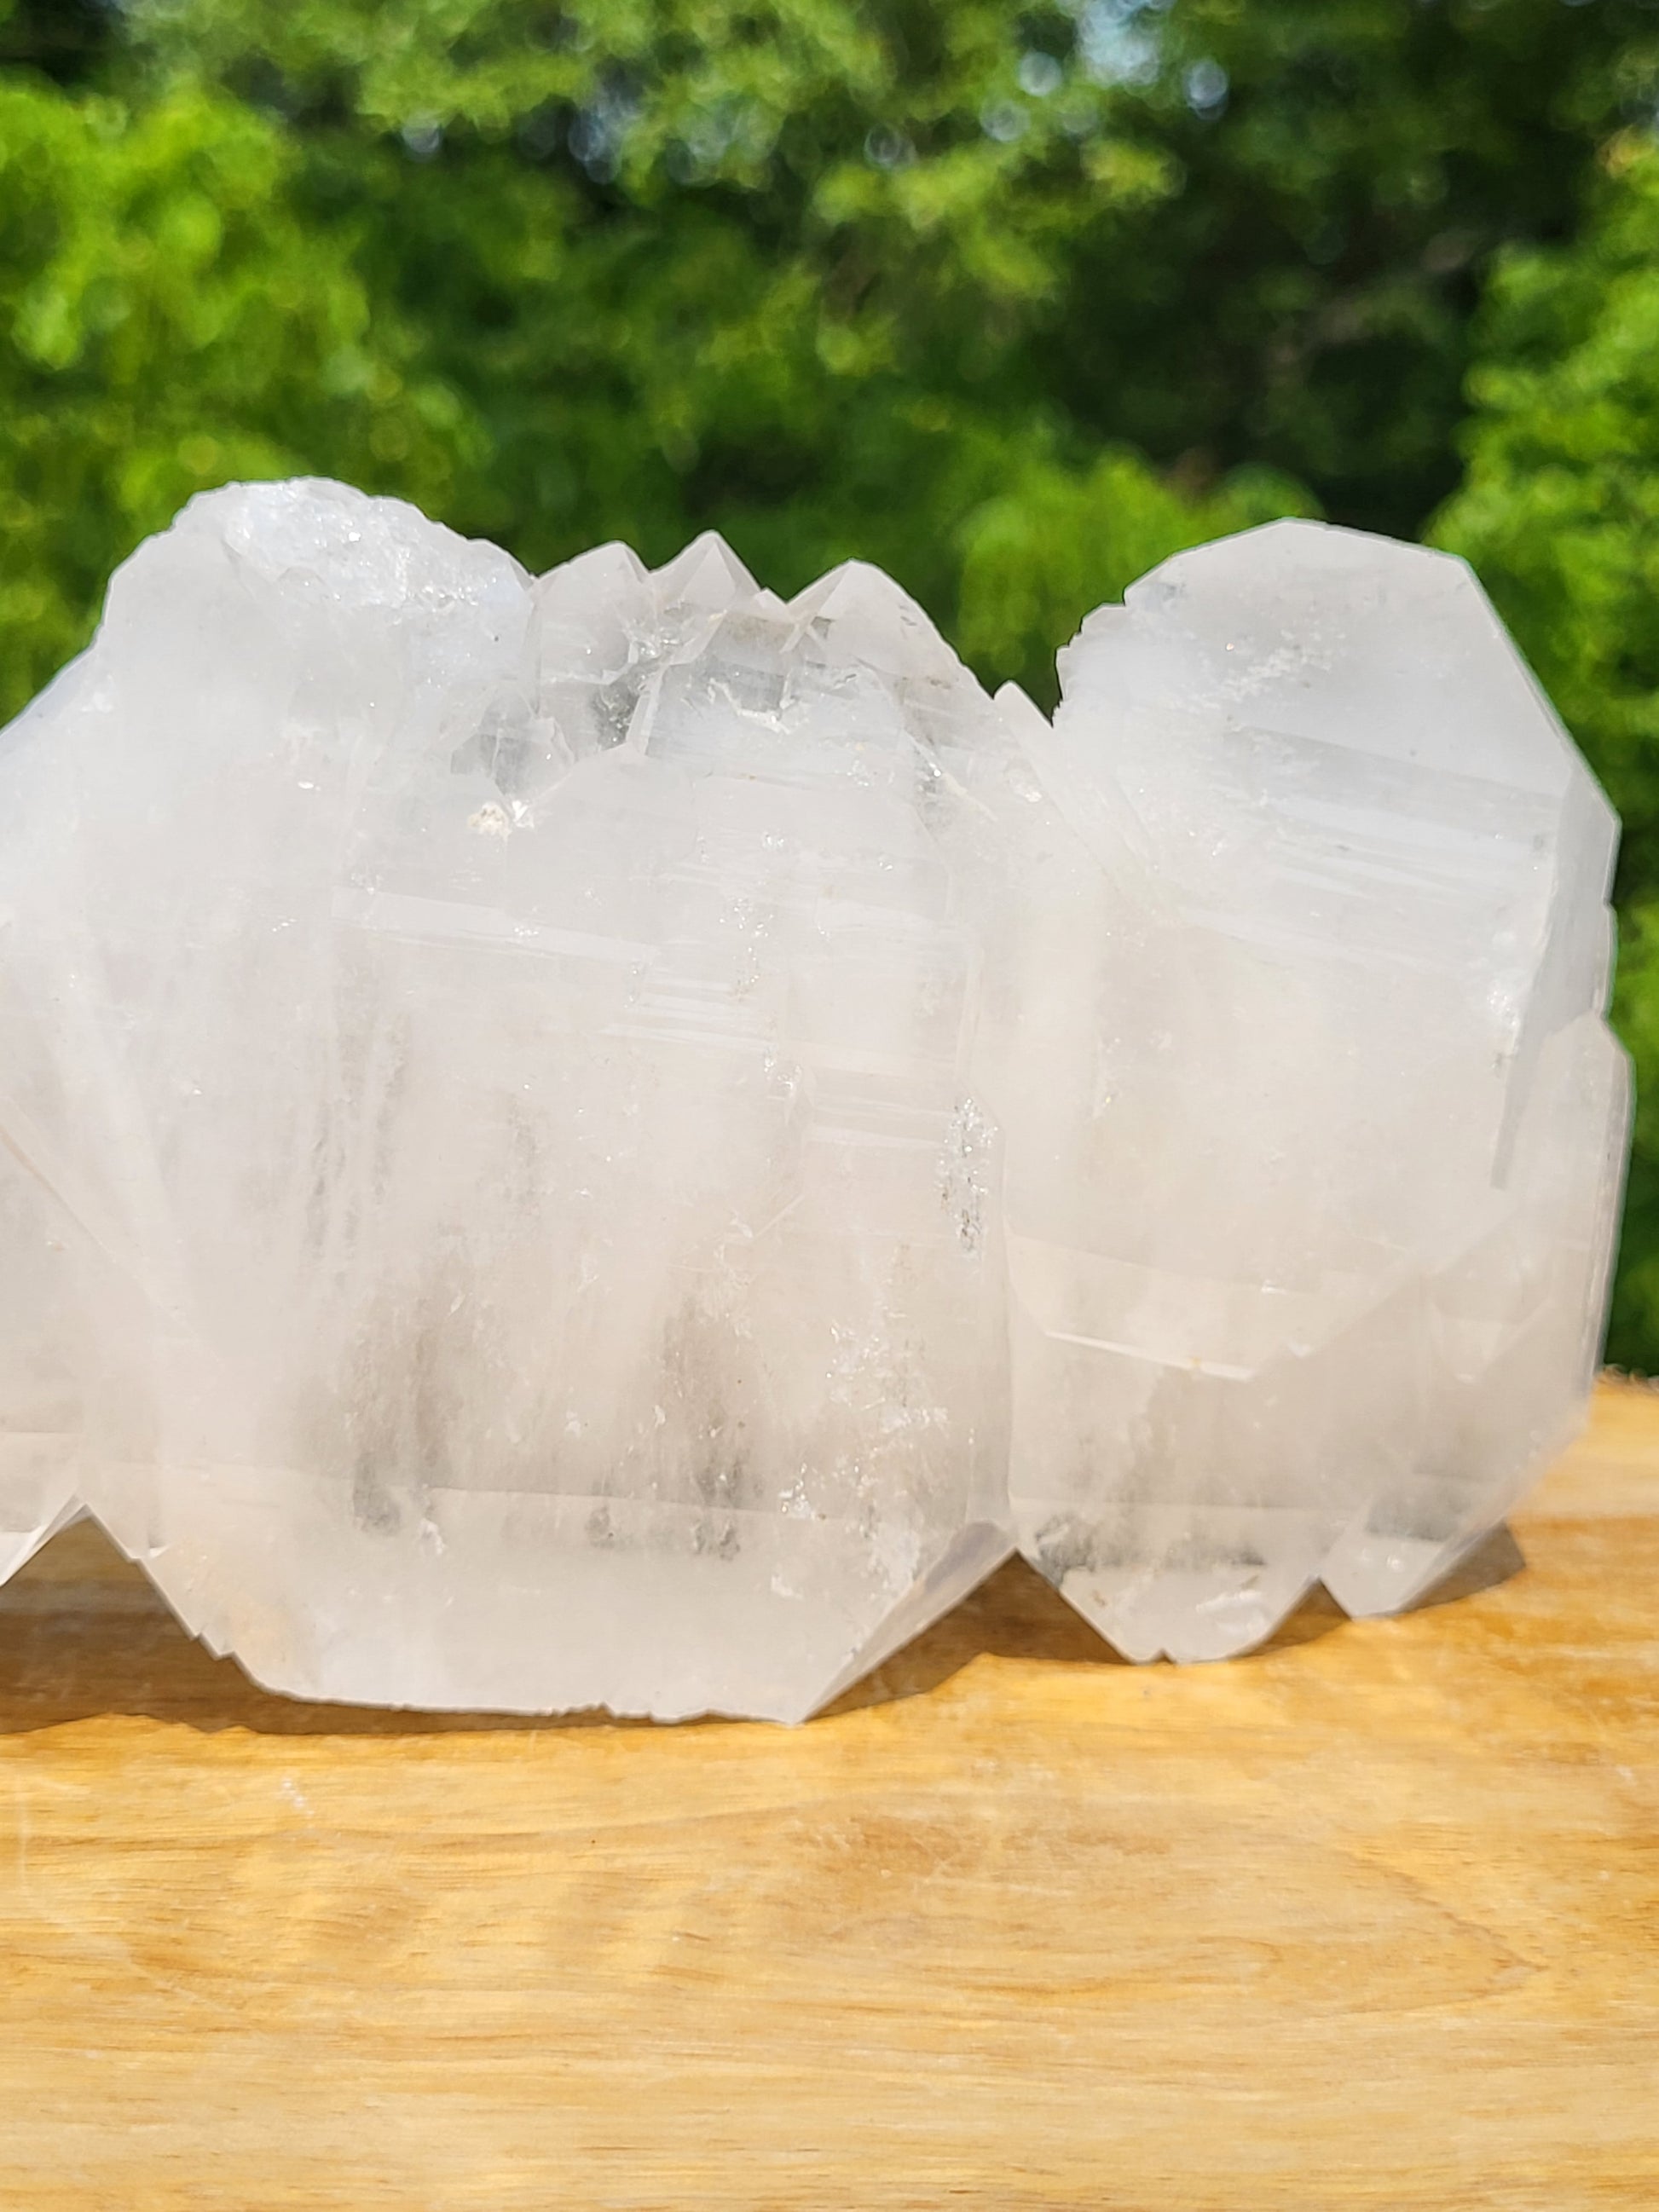 Point formations on large Faden Quartz specimen with "milky" appearance